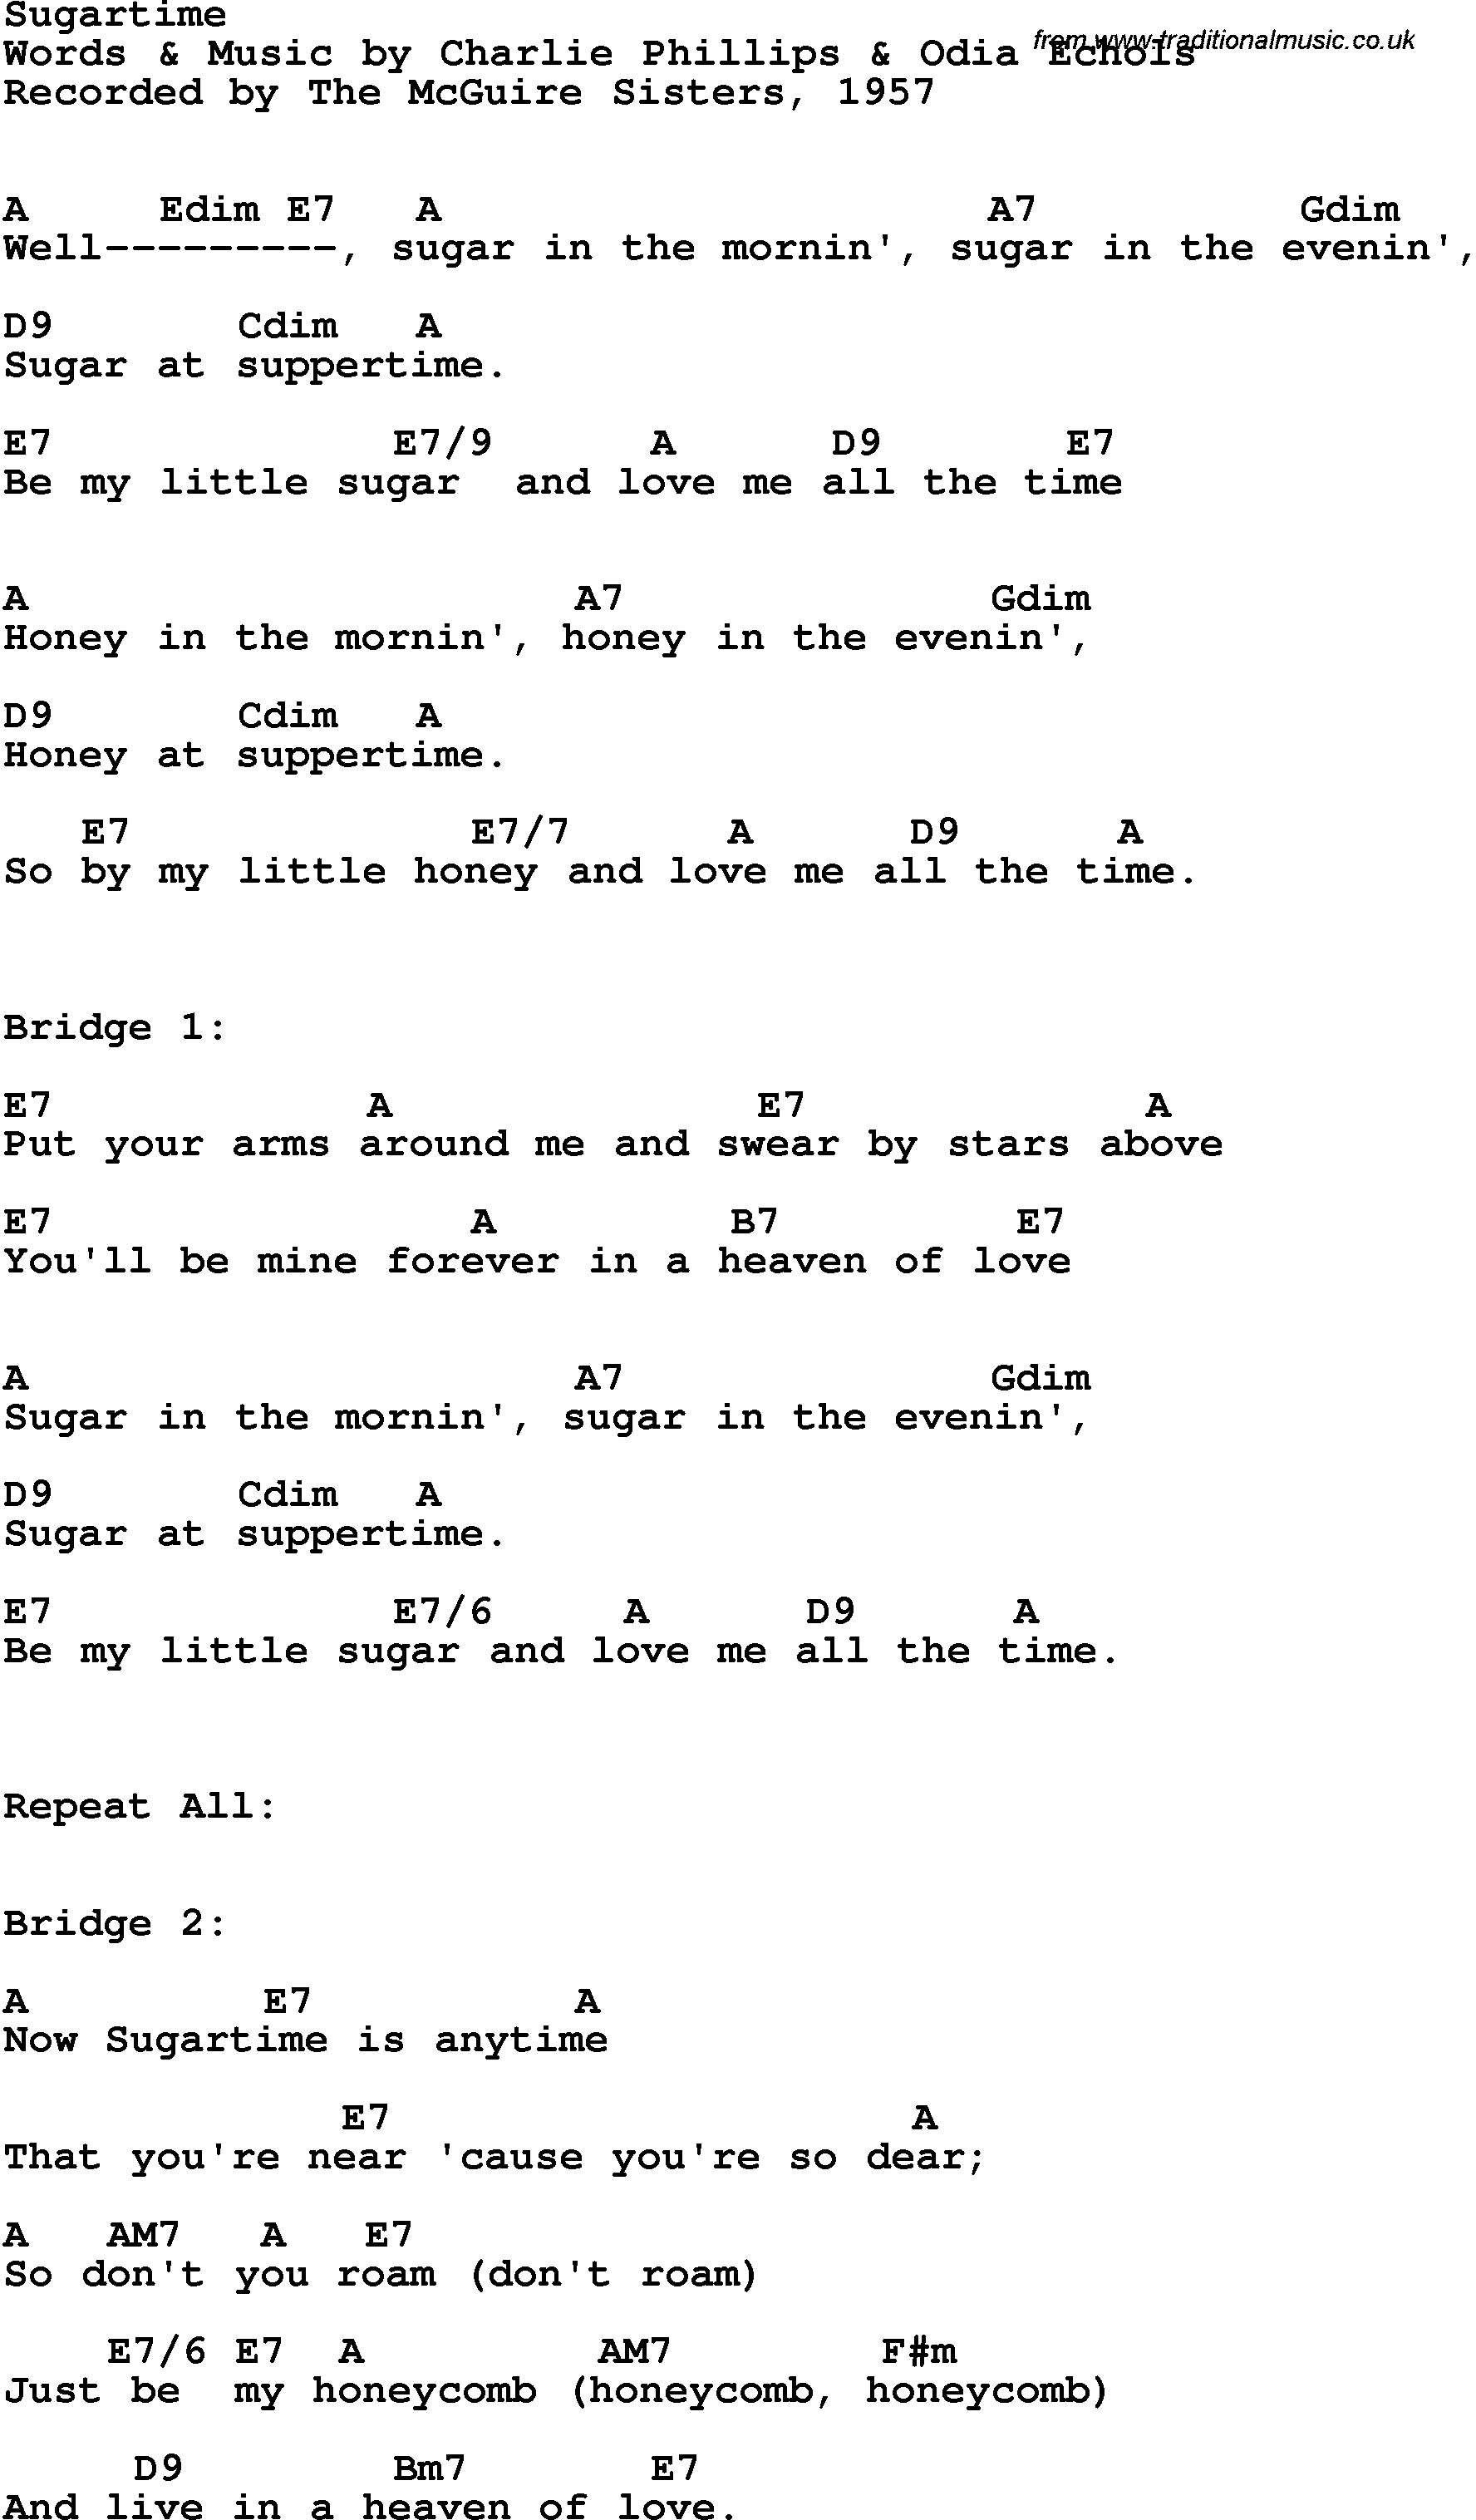 Song Lyrics with guitar chords for Sugartime - The Mcguire Sisters 1957